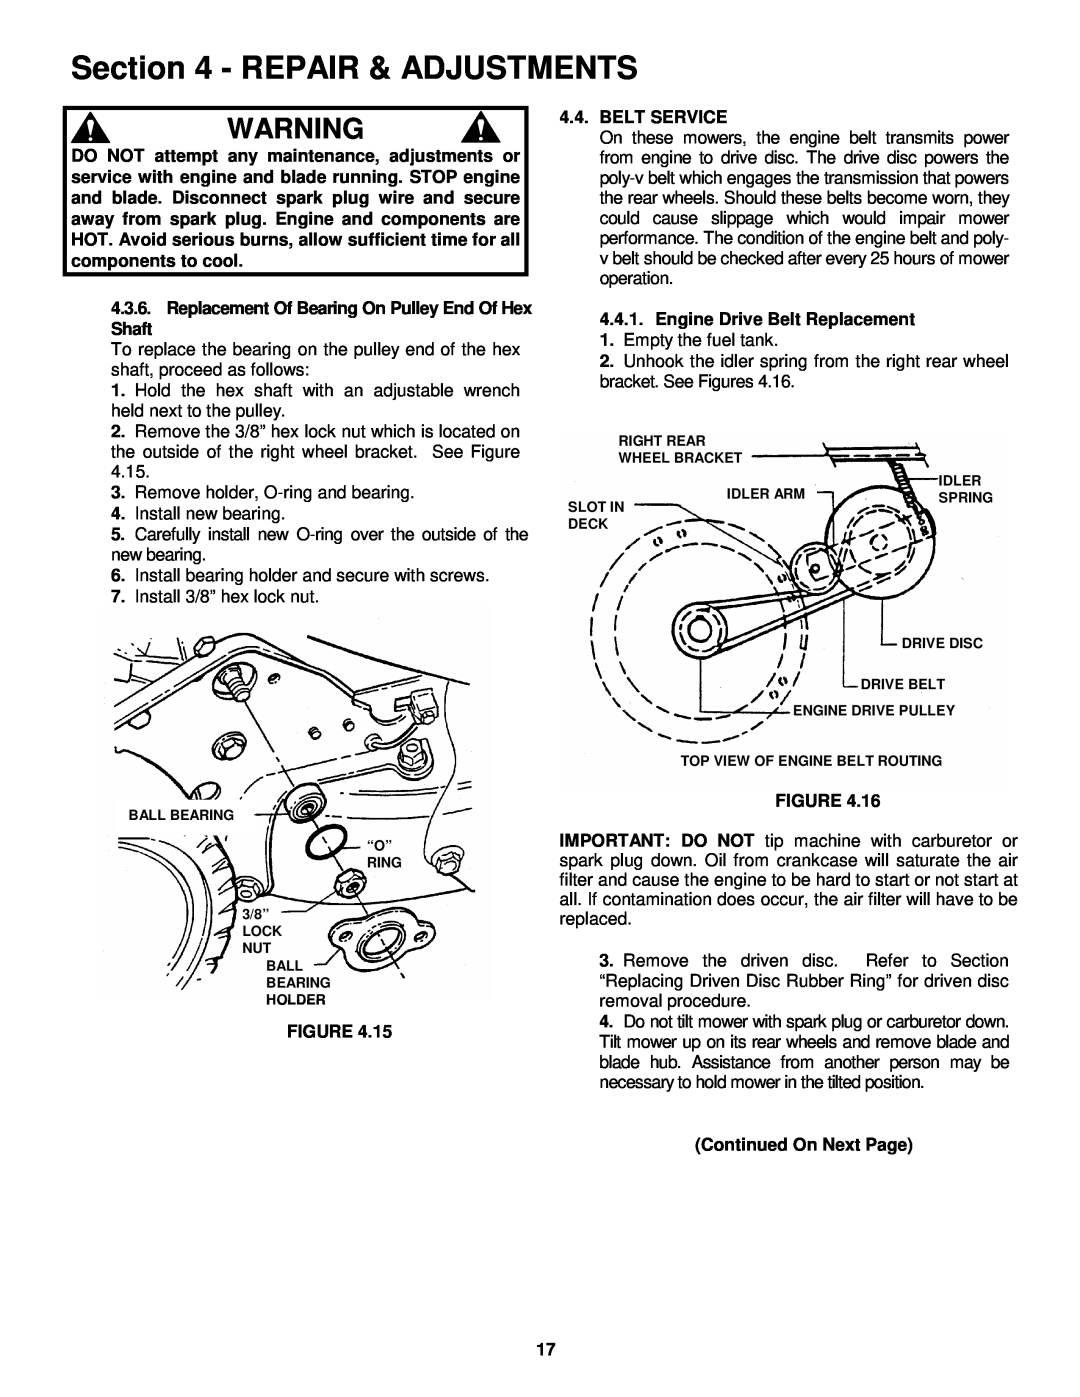 Snapper P216012E Repair & Adjustments, Replacement Of Bearing On Pulley End Of Hex, Shaft, Belt Service 